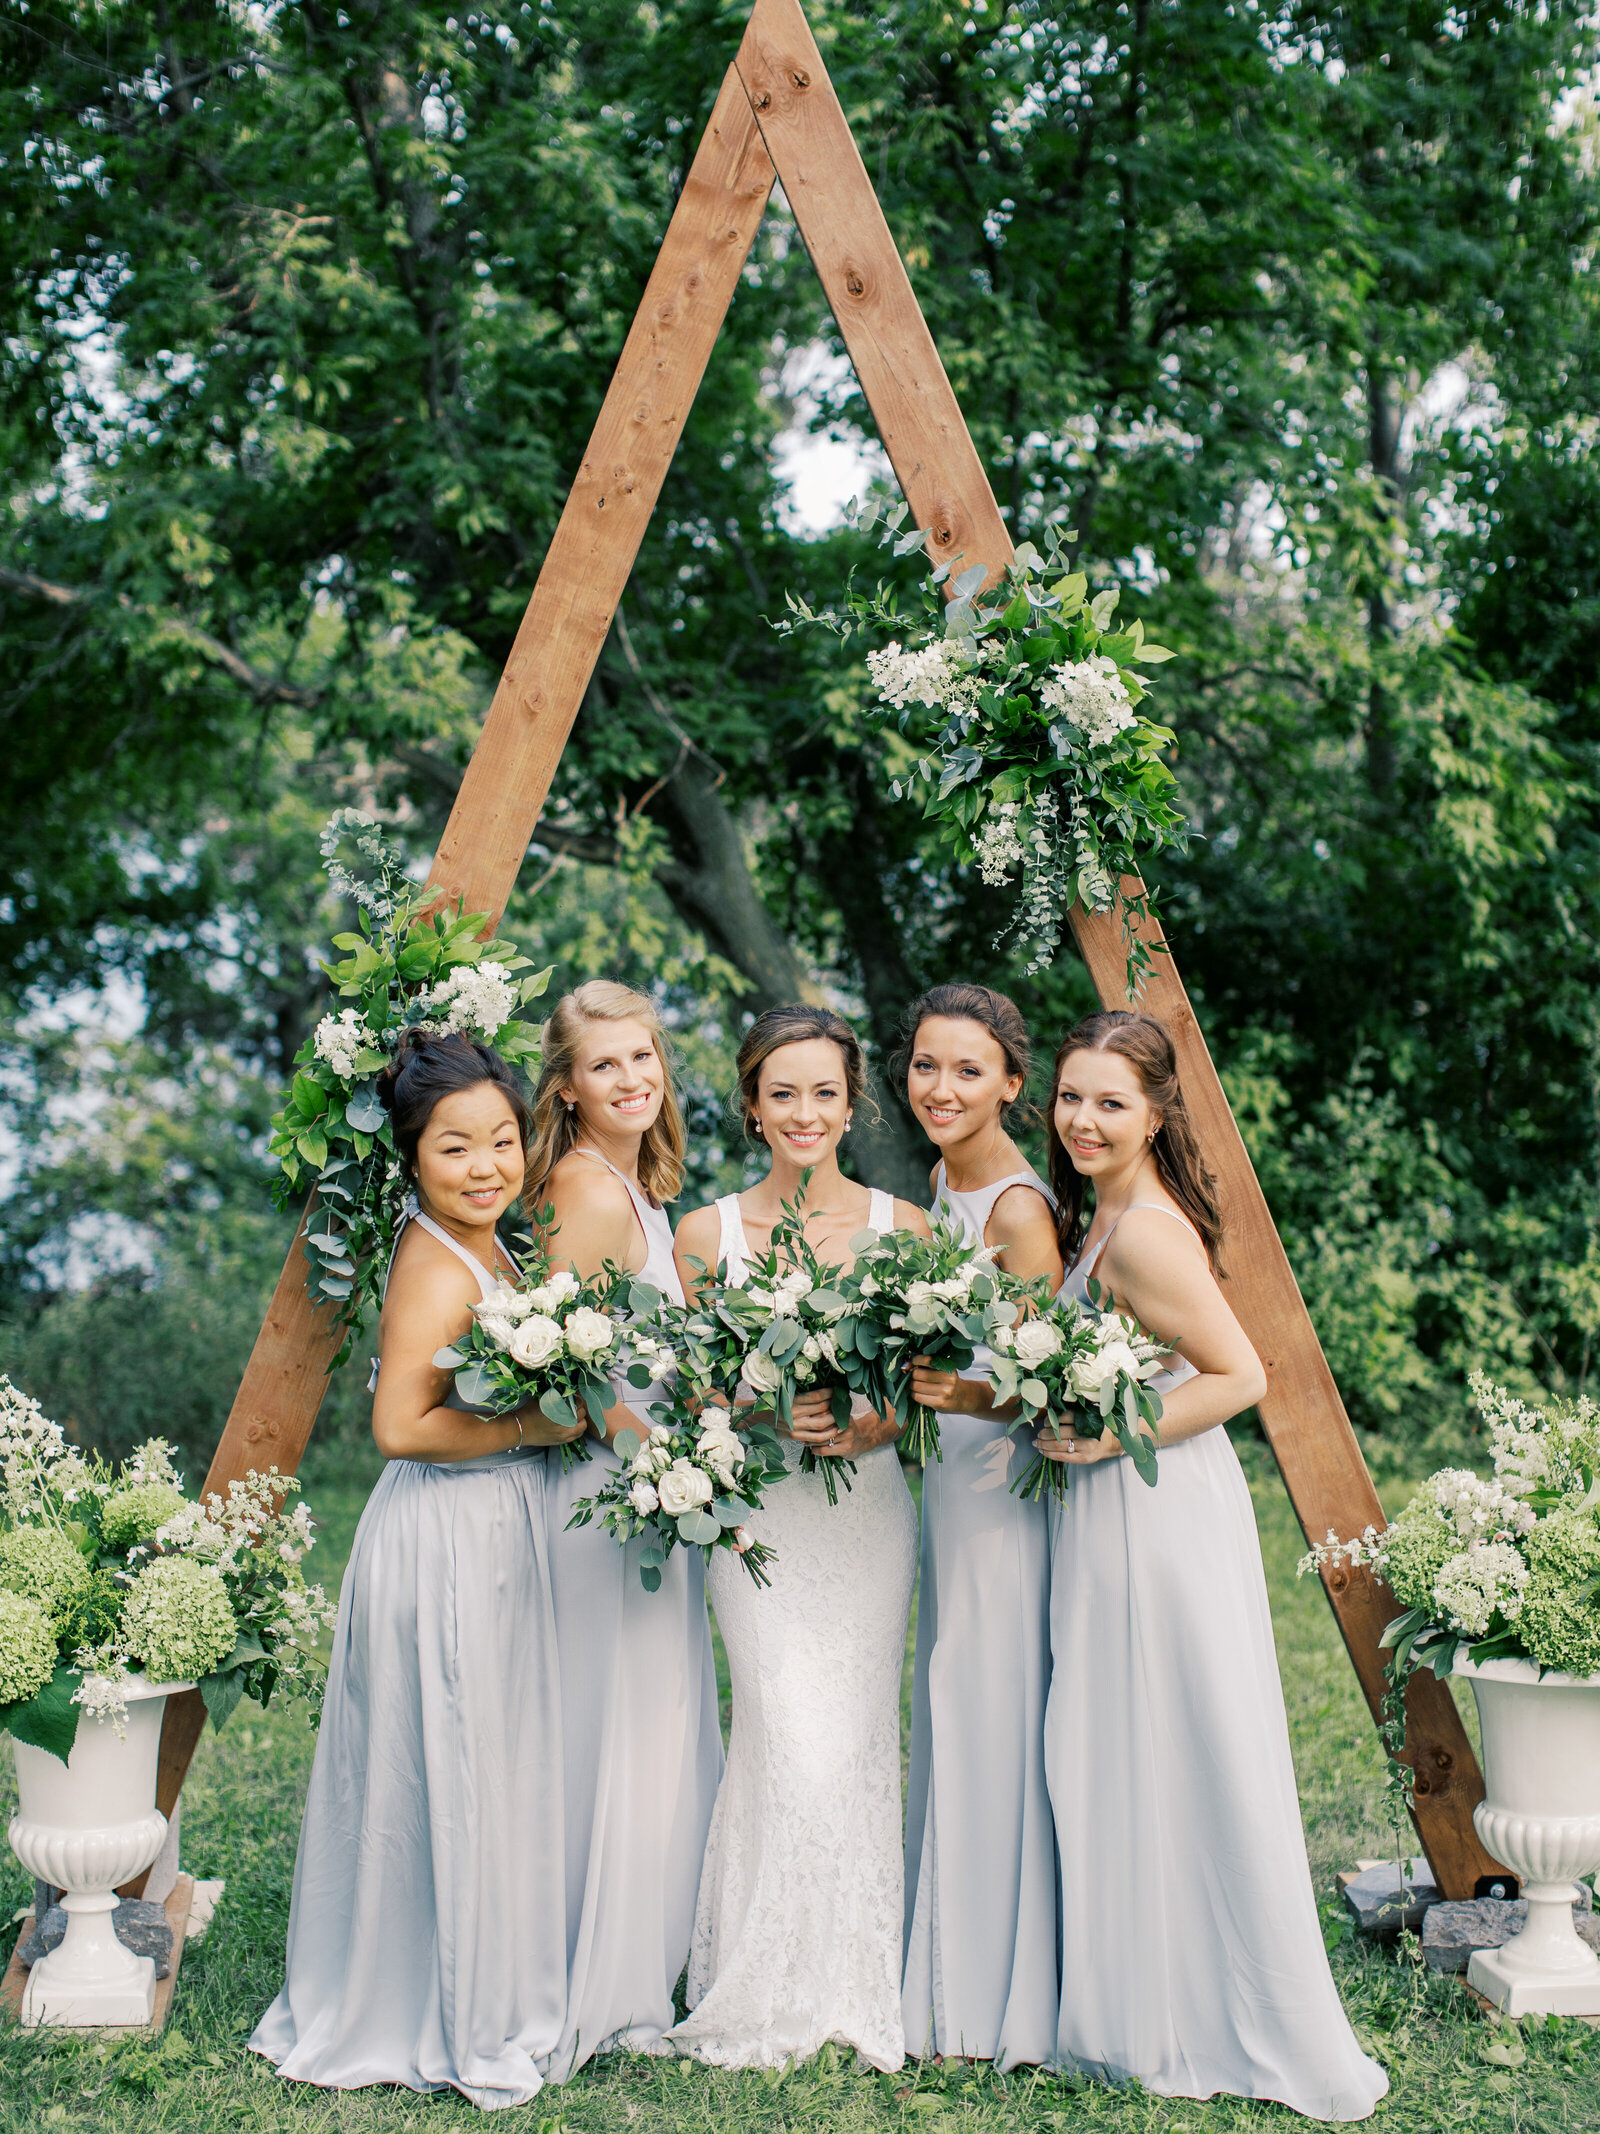 Wooden Triangle Ceremony Arch